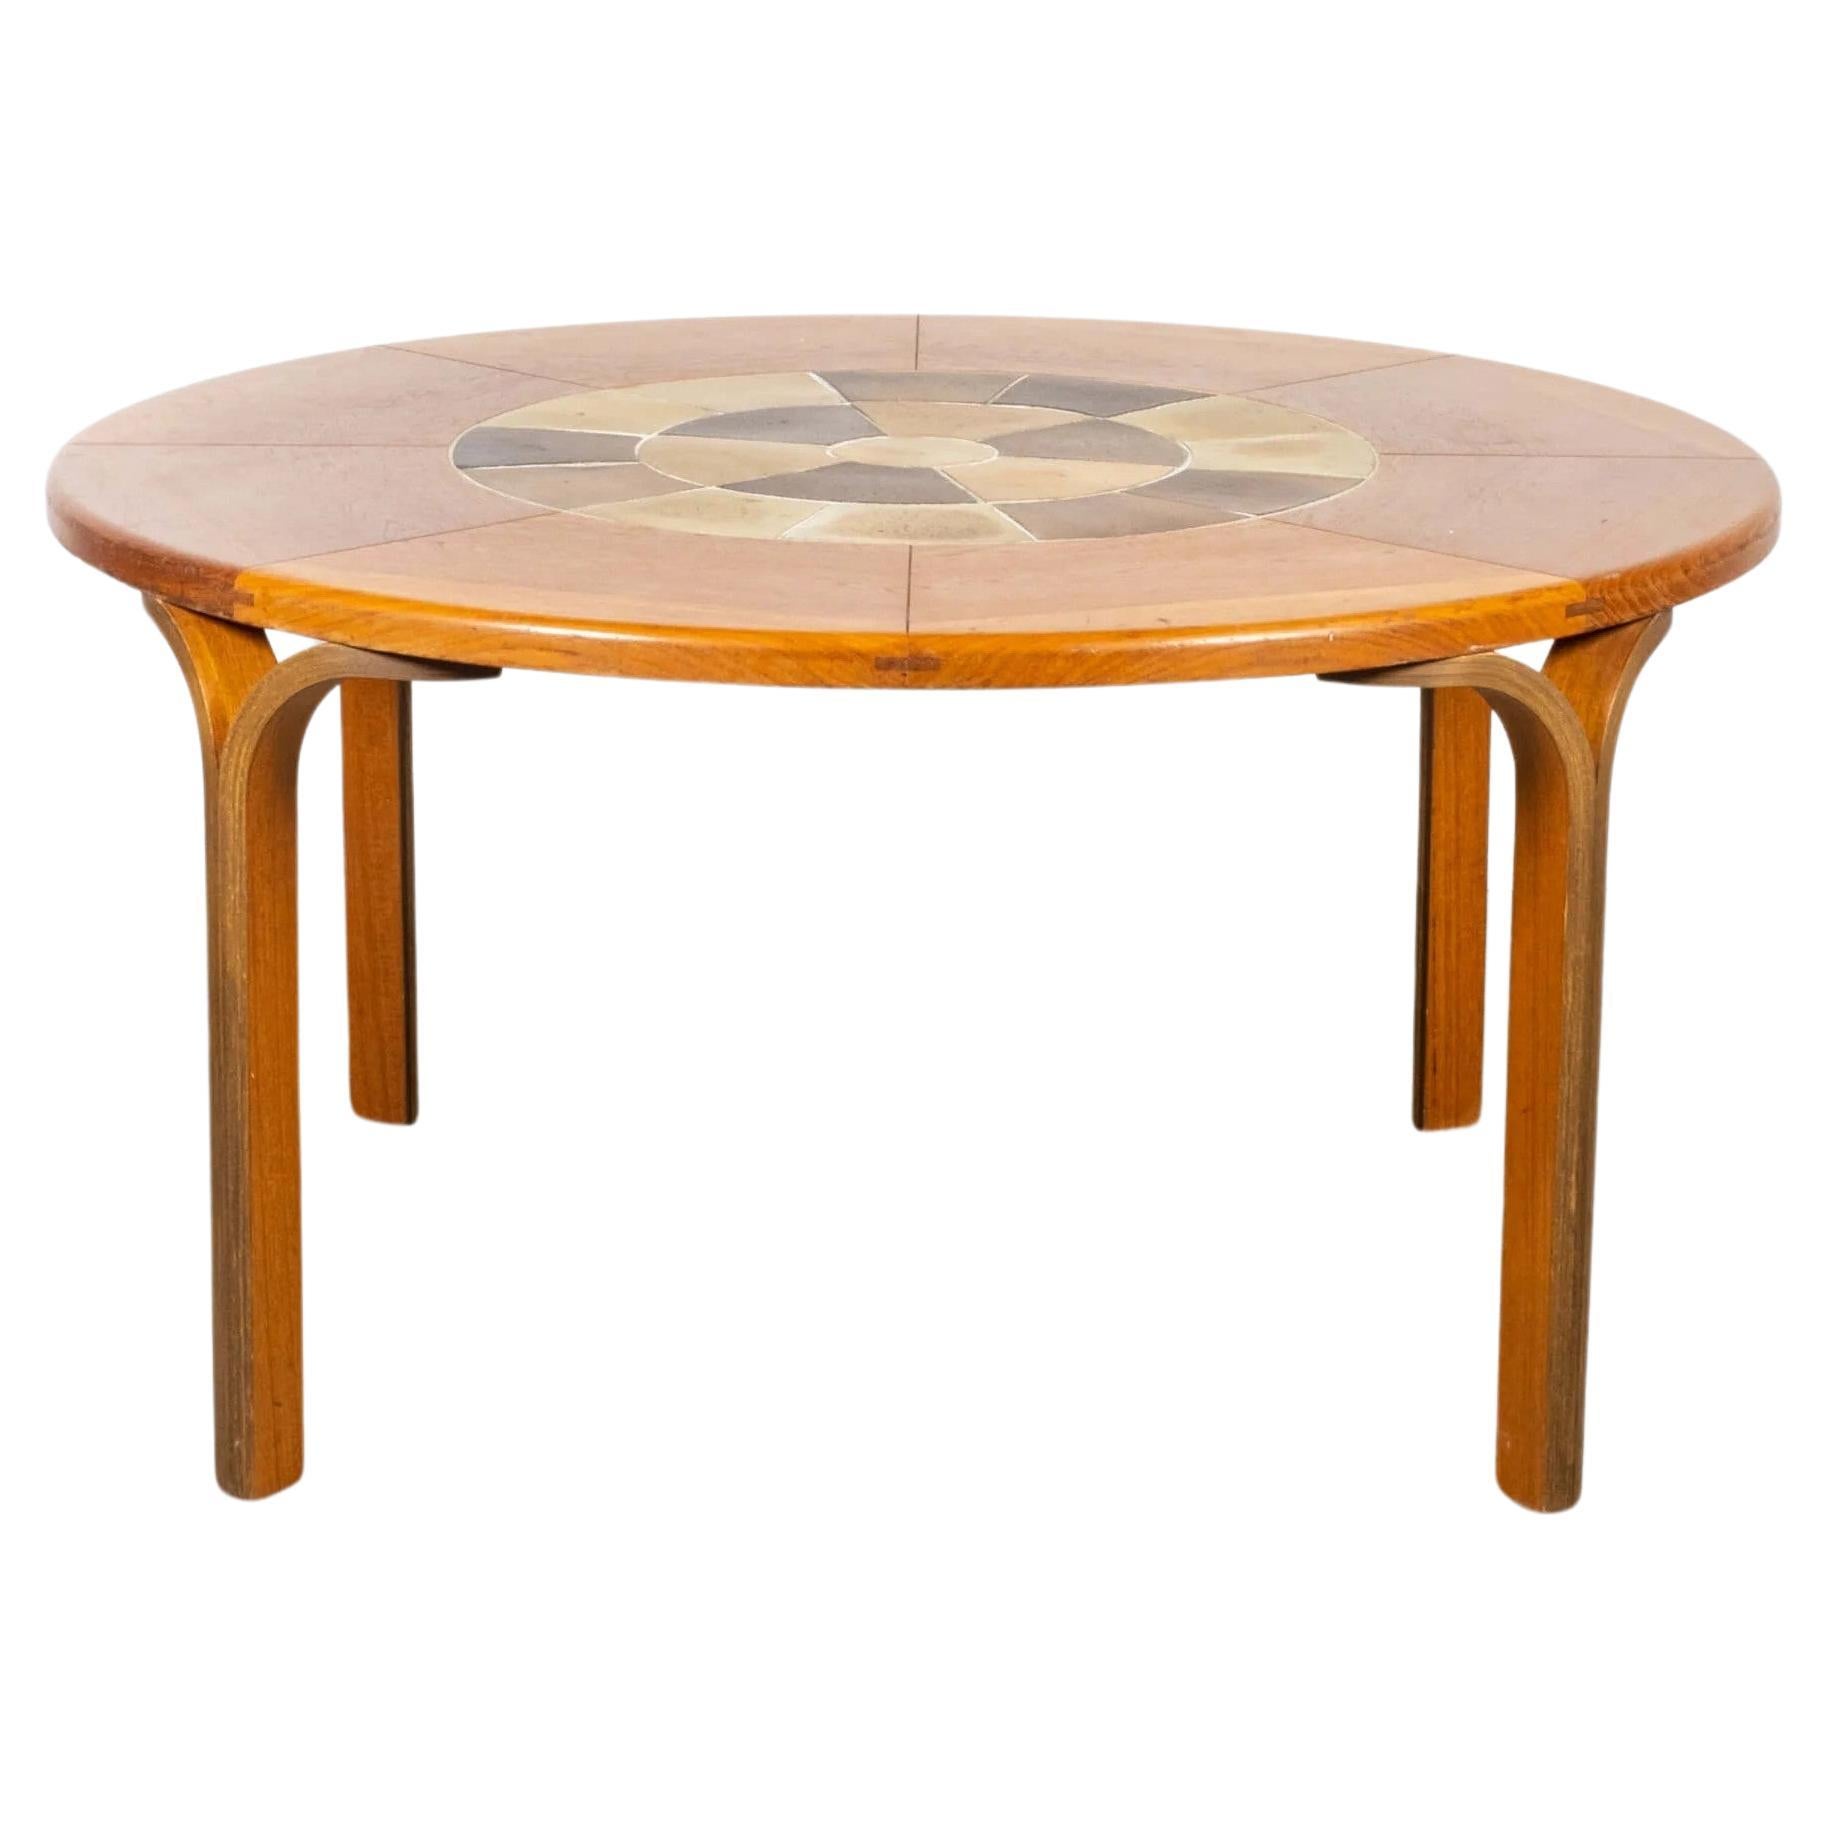 Haslev Mobelsnedkeri Round Tiled-Top Dining Table by Tue Poulsen For Sale